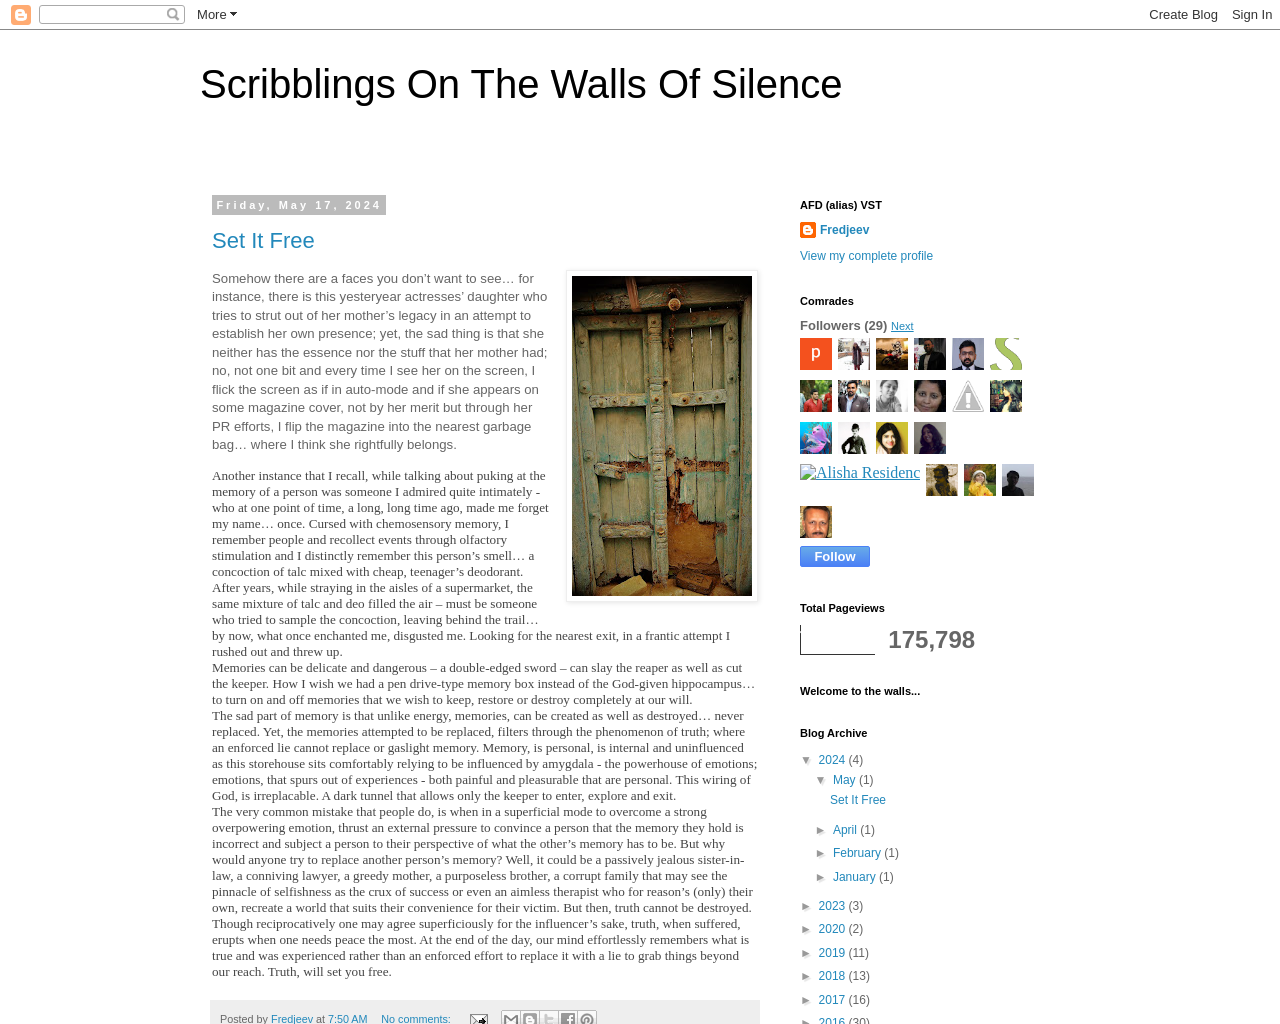 Scribblings on the Walls of Silence